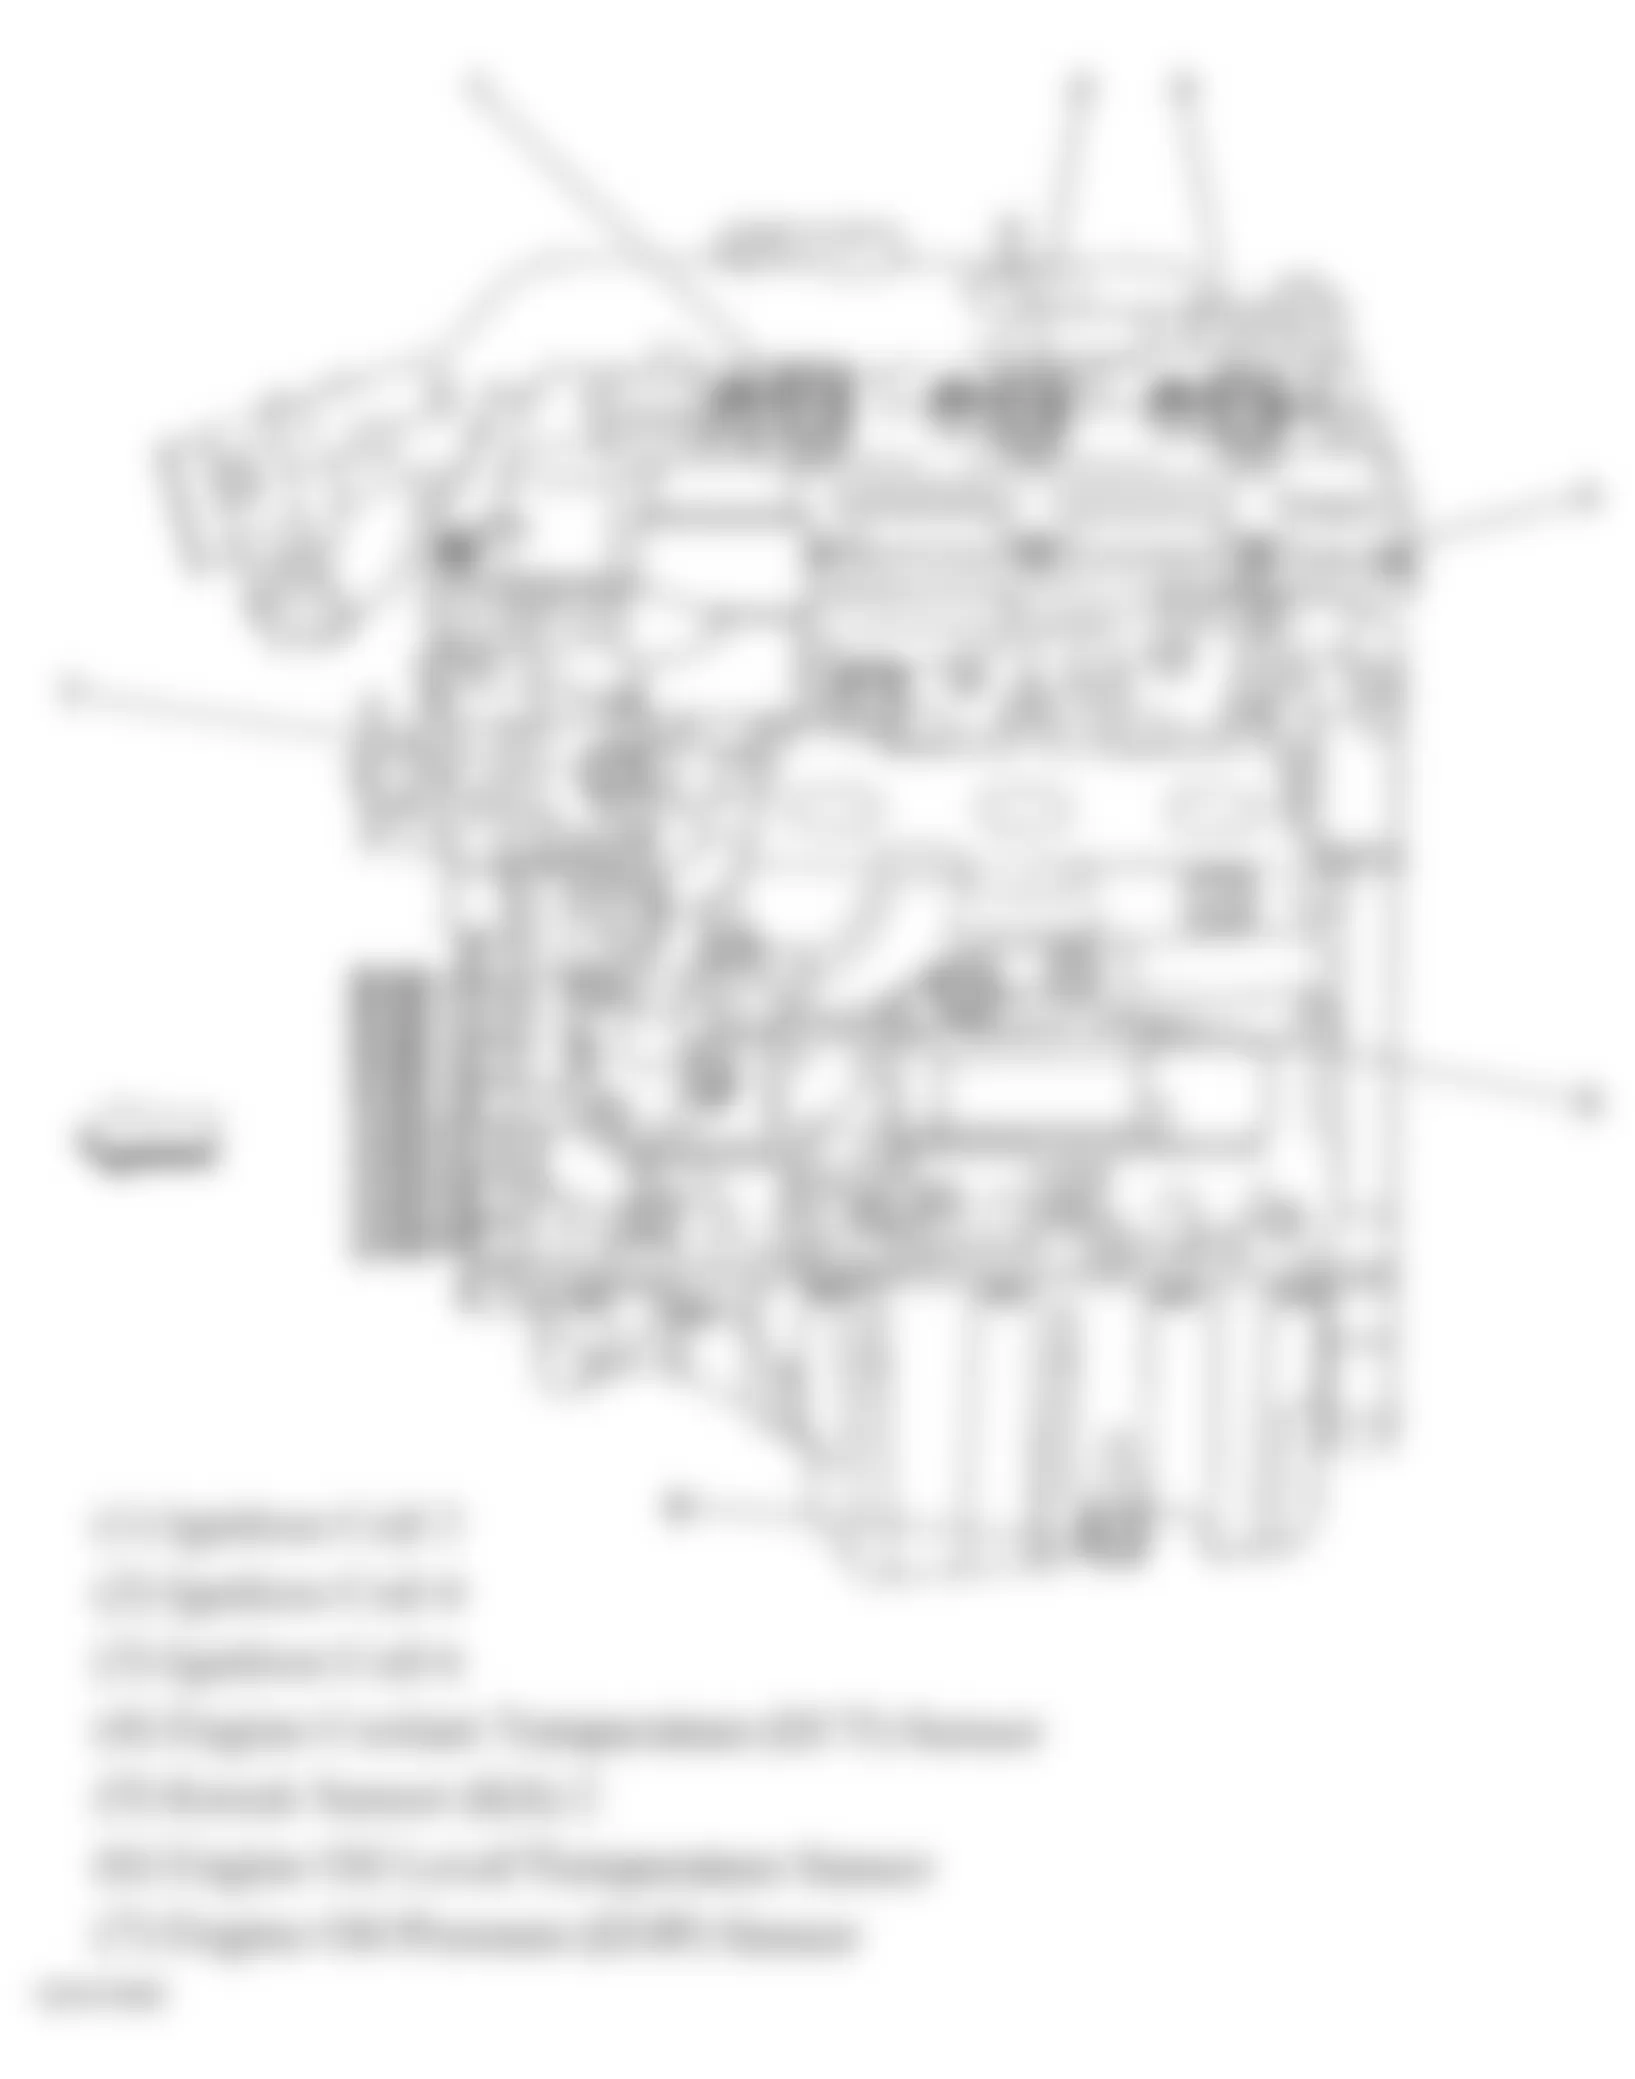 Buick Allure CX 2008 - Component Locations -  Left Side Of Engine (3.6L)